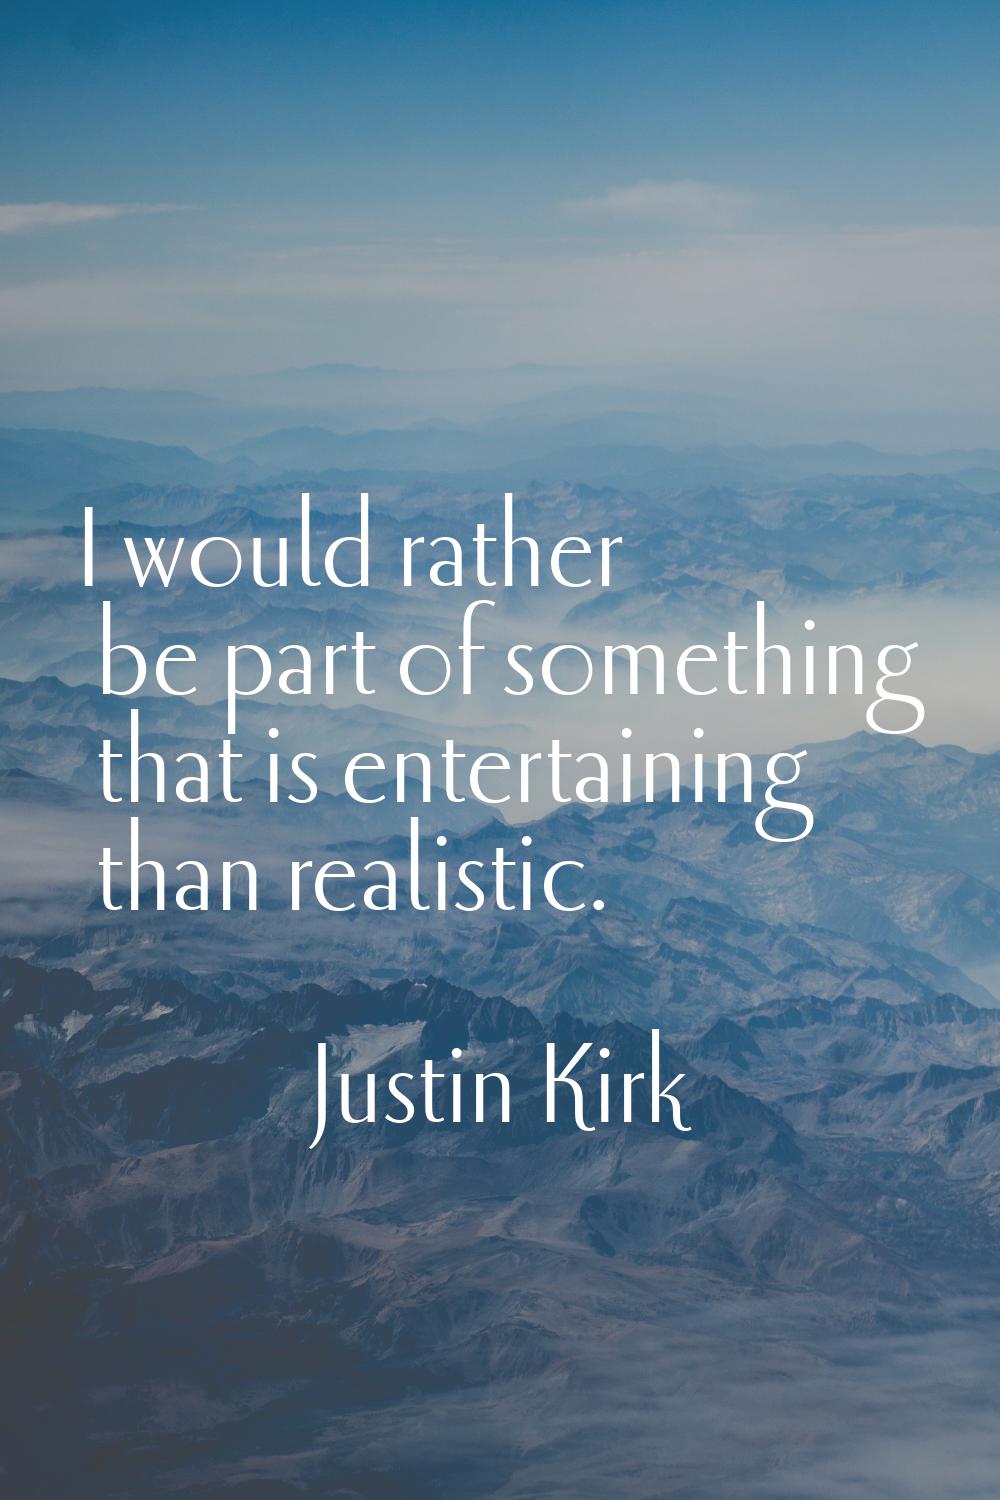 I would rather be part of something that is entertaining than realistic.